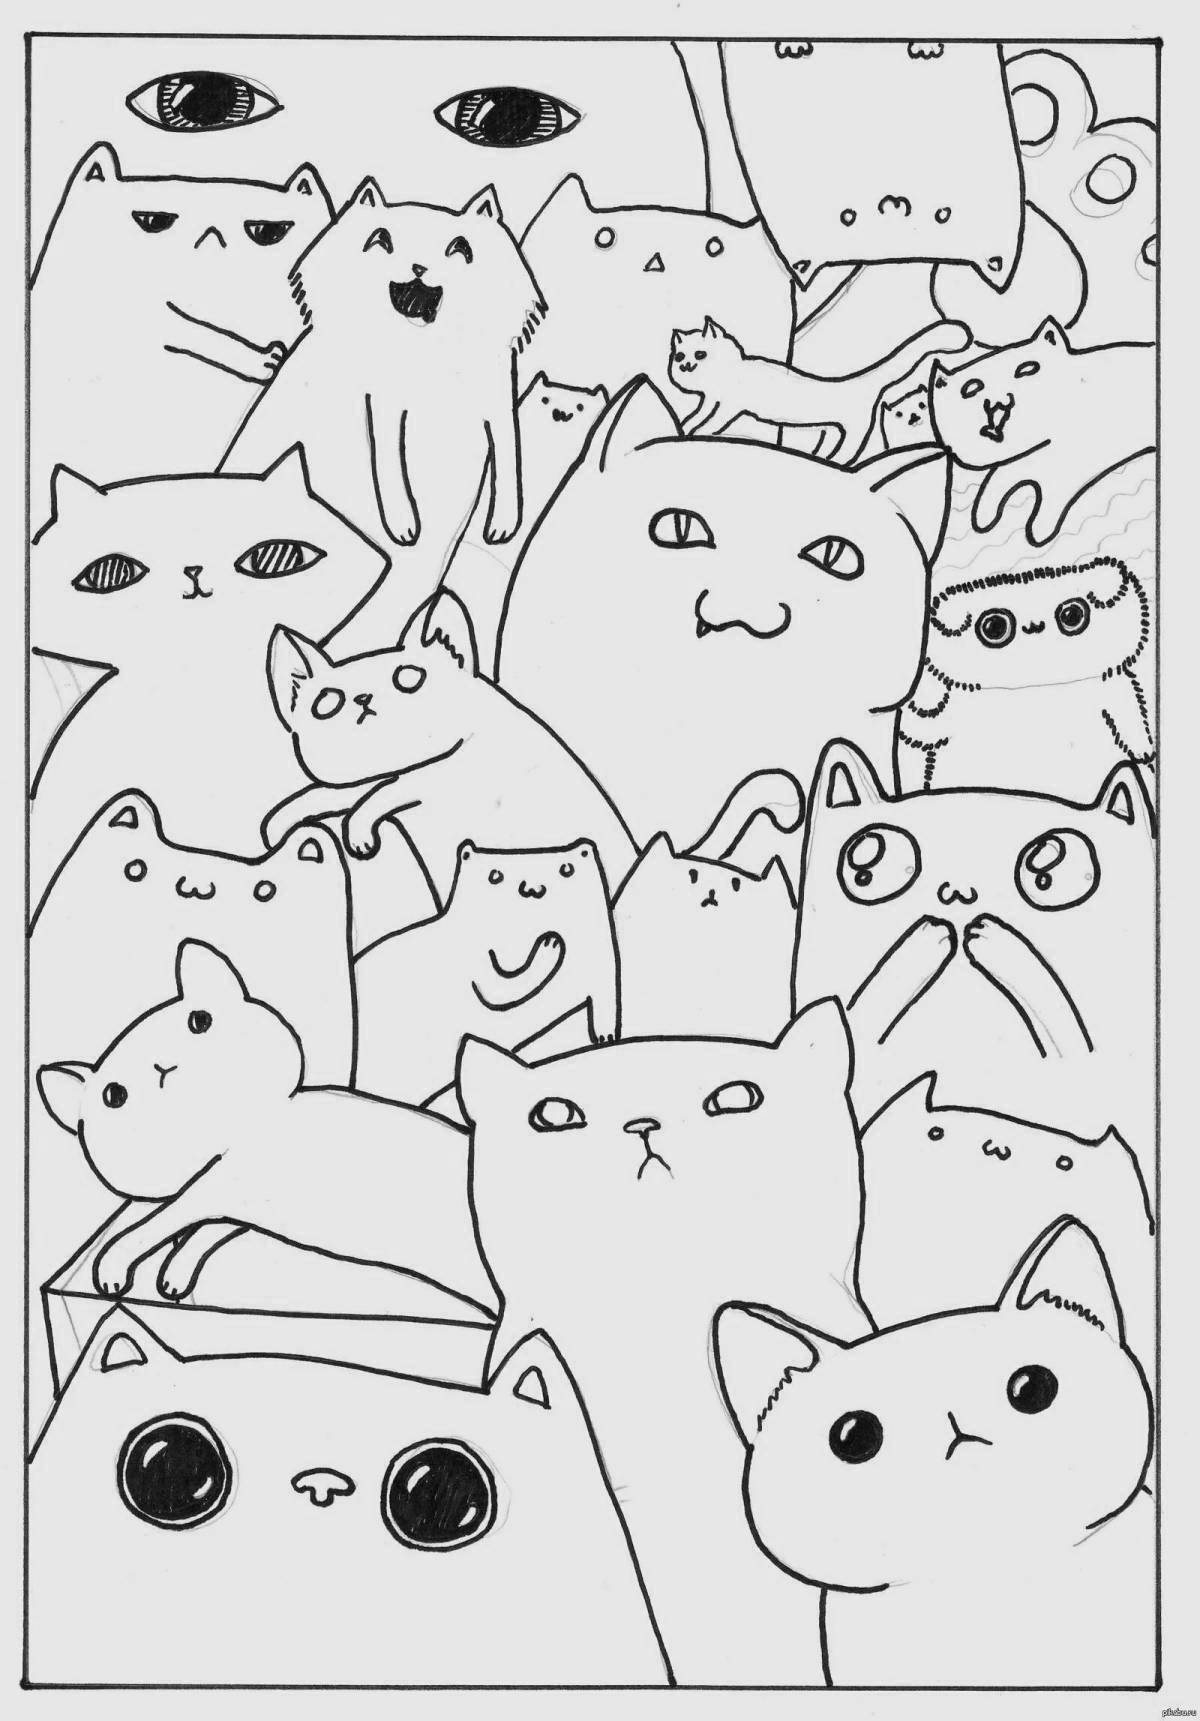 Fun coloring book with lots of cats